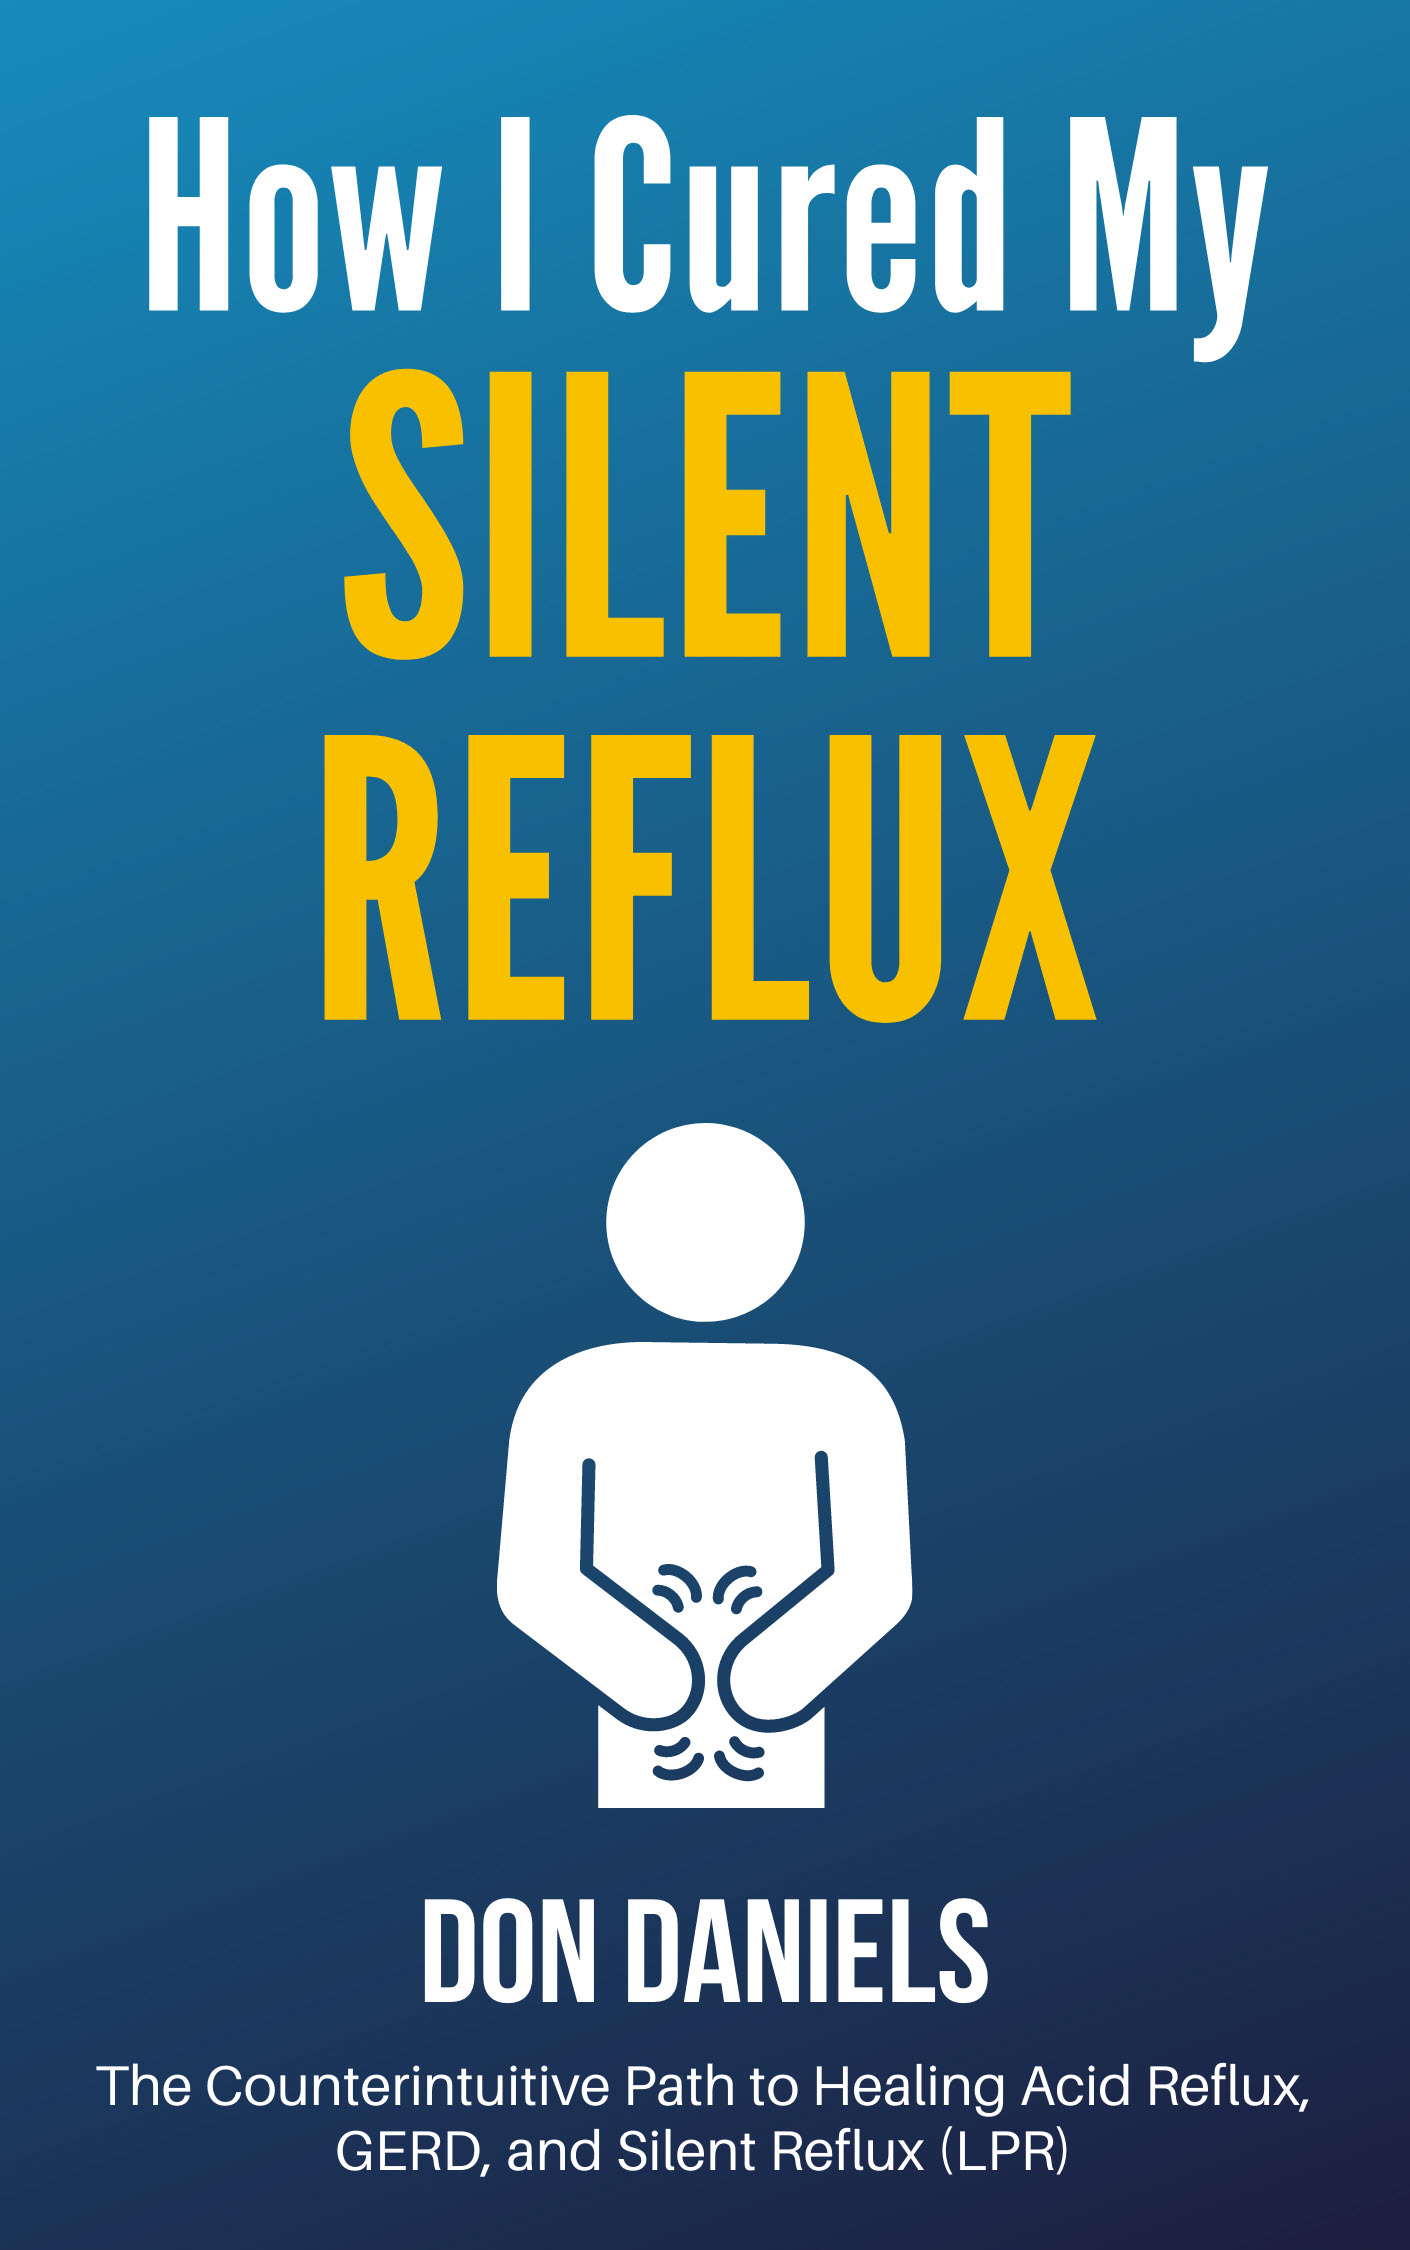 FREE: How I Cured My Silent Reflux by Don Daniels